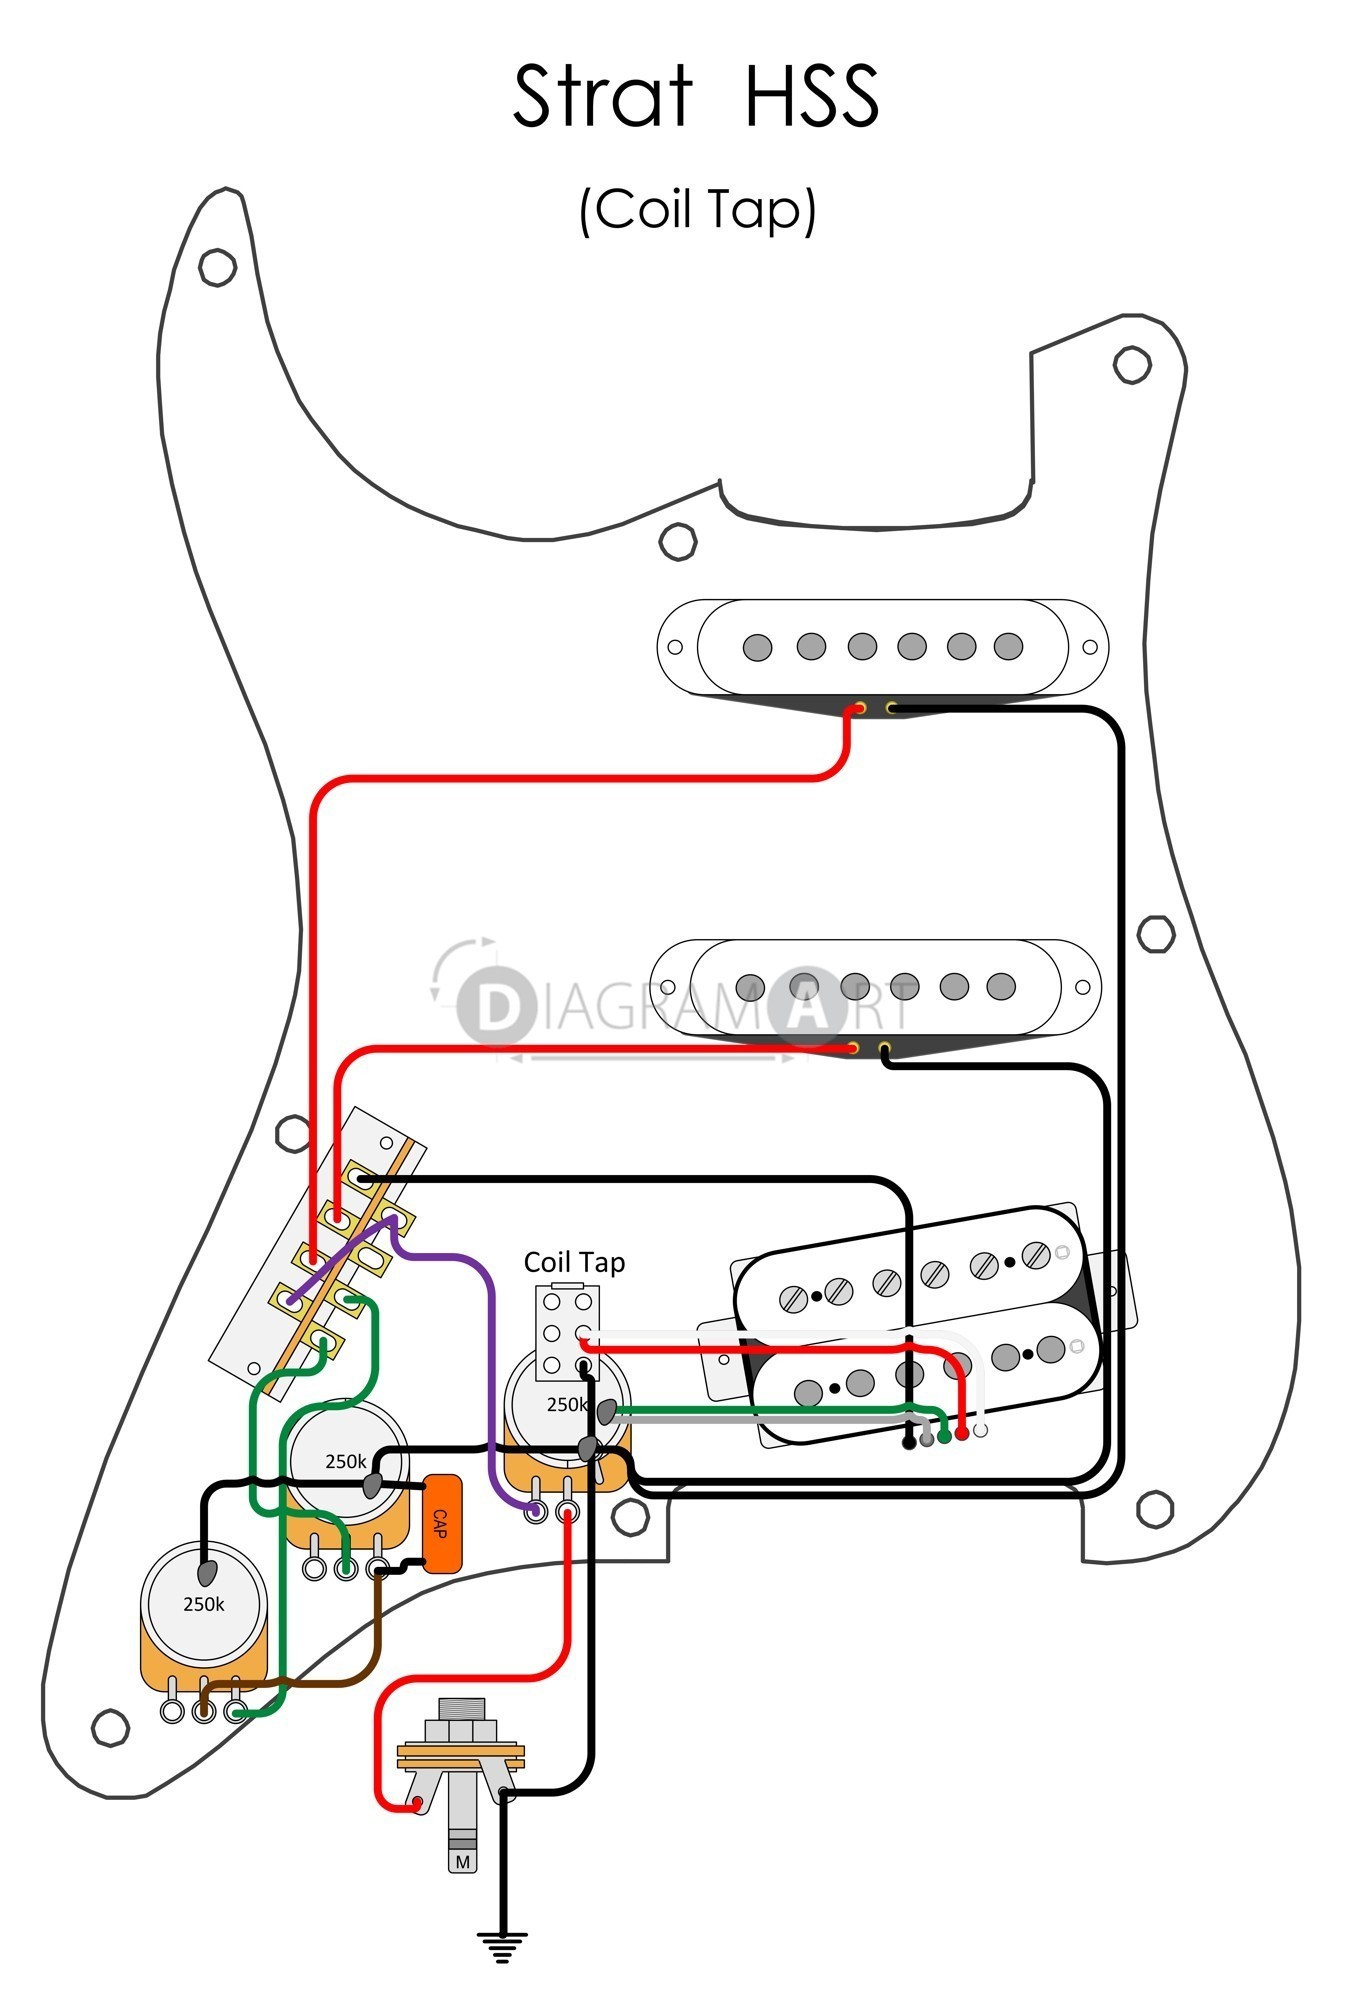 Wiring Diagram for Prs Guitars New Wiring Diagram for A Guitar Refrence Wiring Diagram Yamaha Electric